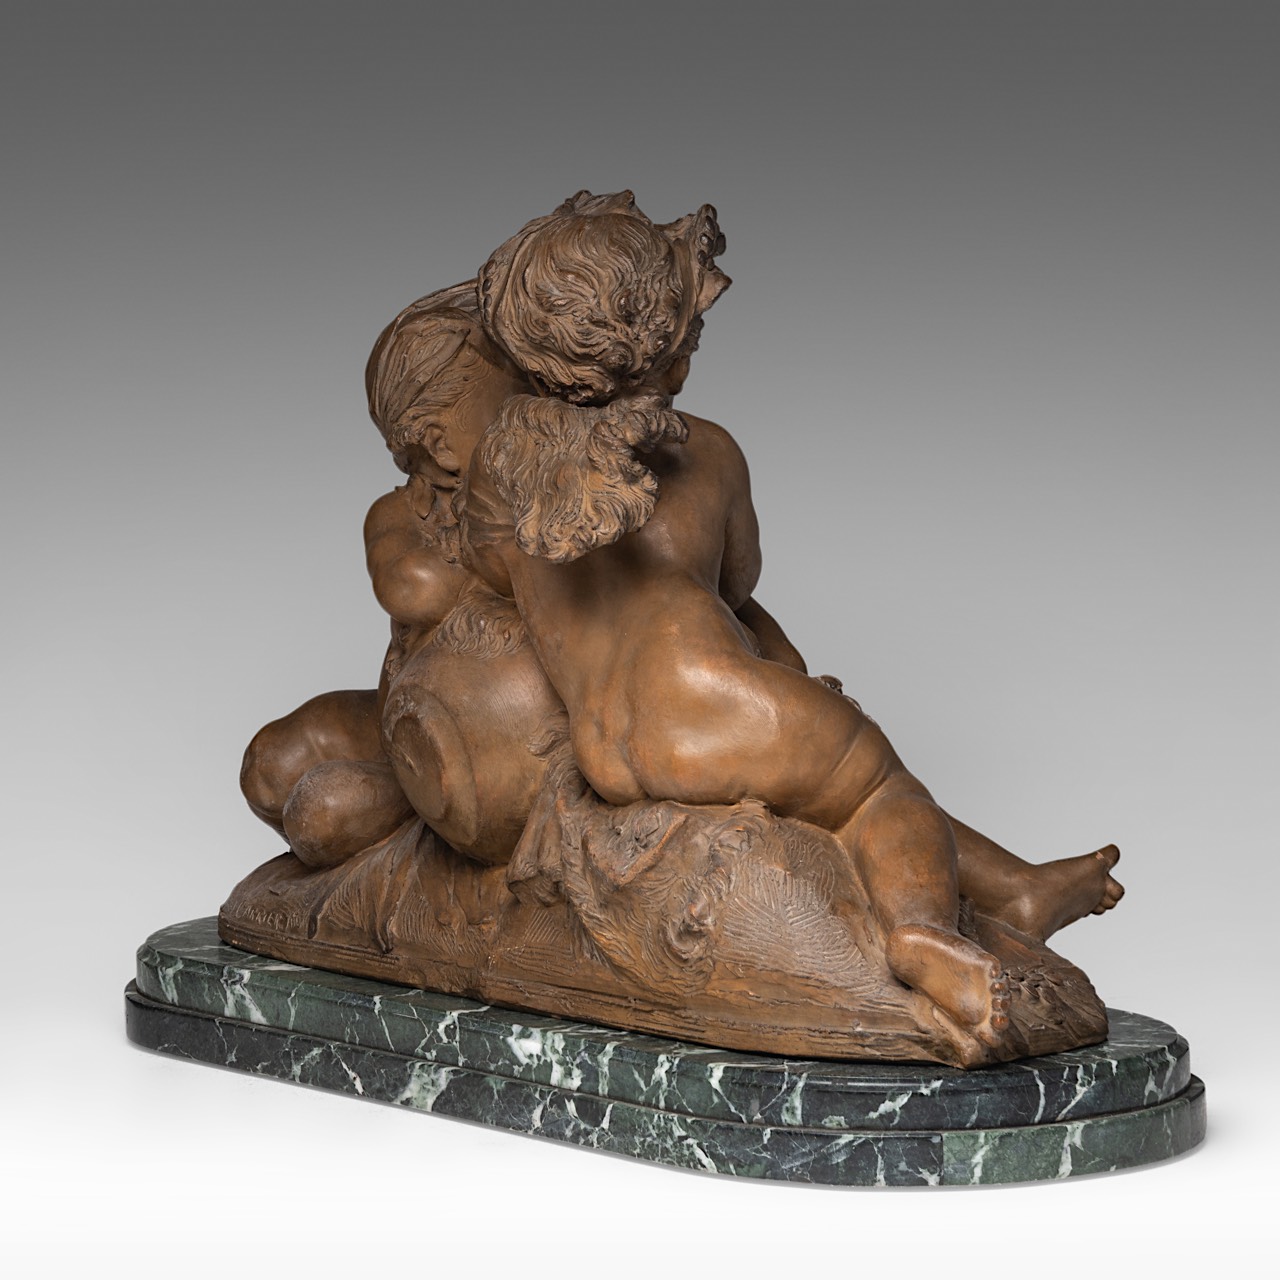 Carrier-Belleuse (1824-1887), two putti by the fountain, terracotta on a marble base, H 43 - W 68 cm - Bild 6 aus 10